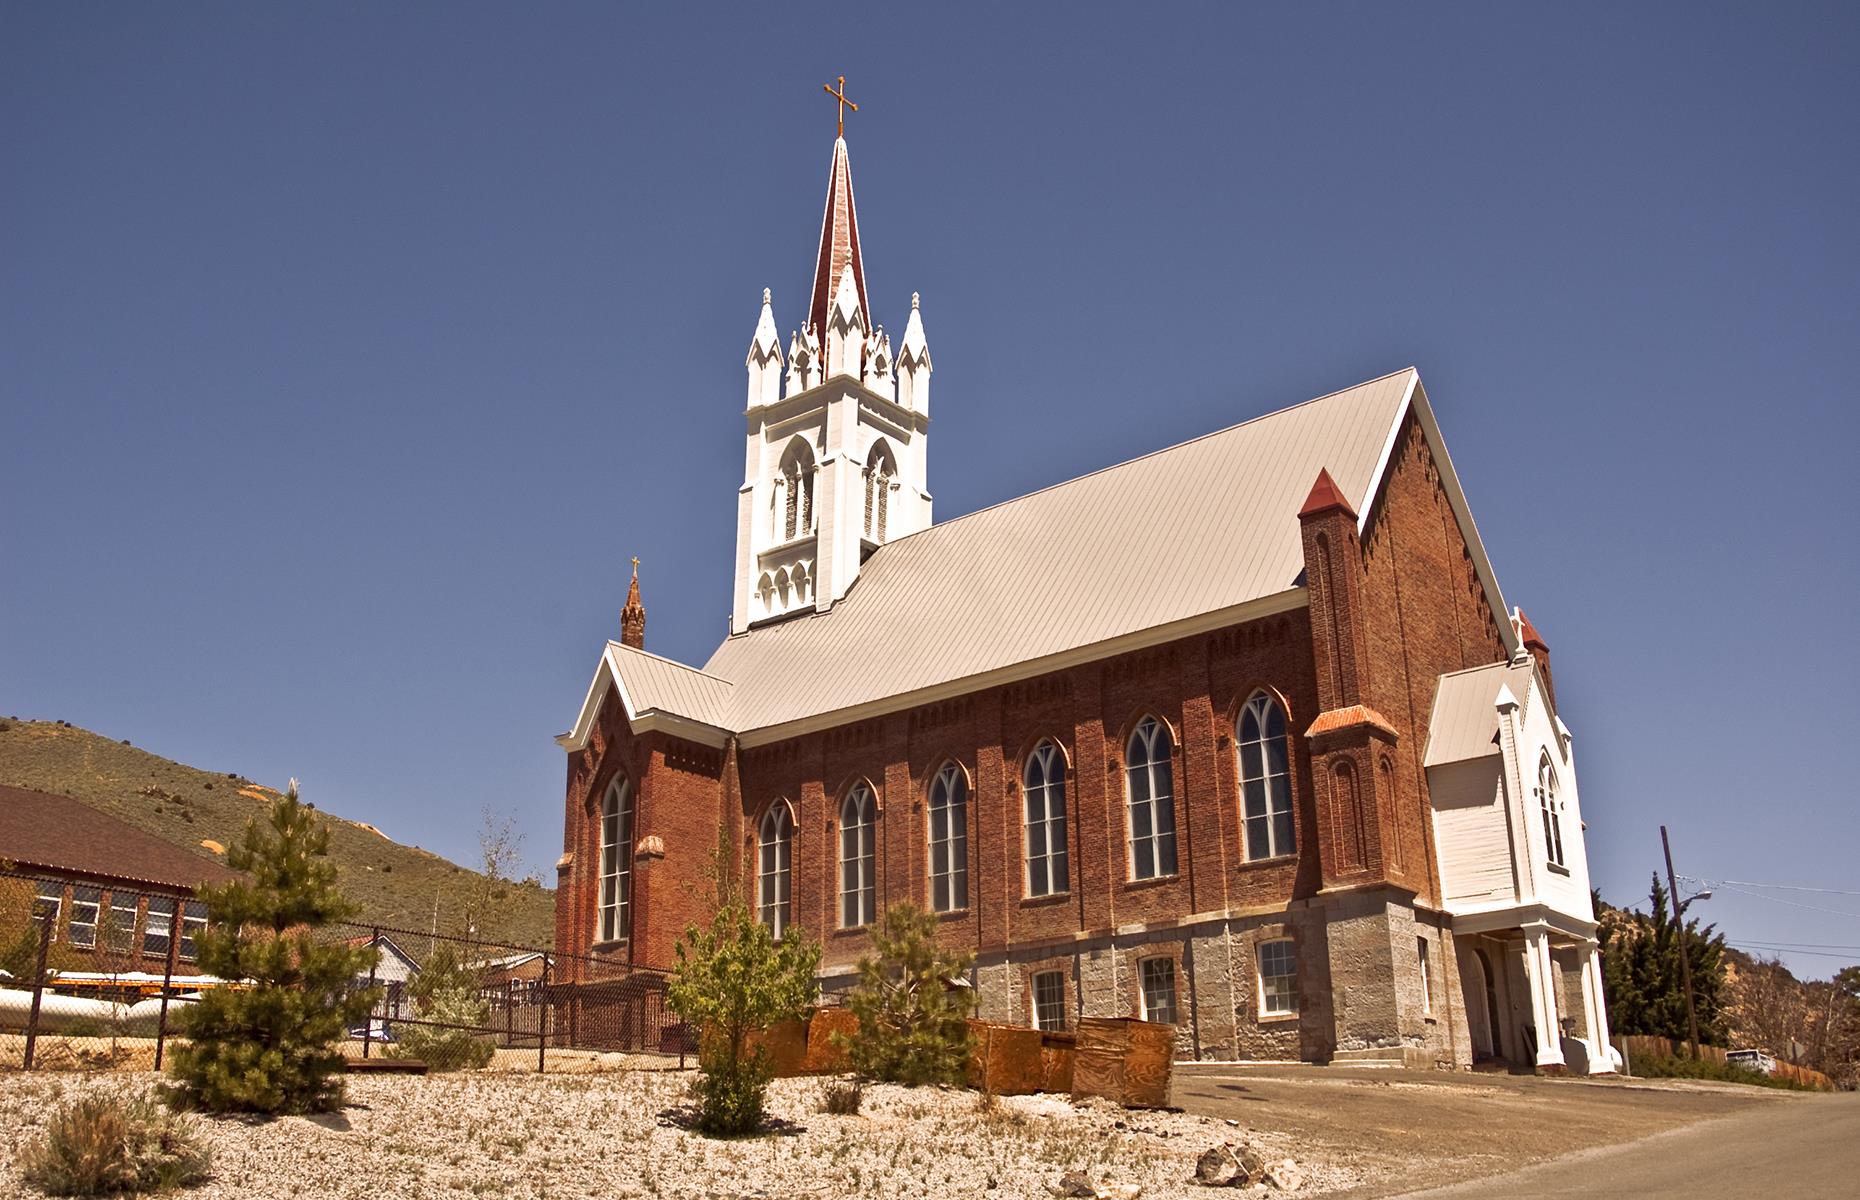 <p>Dating back to 1868, this historic church in Virginia City has been a fixture in the community for over 150 years and is one of the oldest continuously-operating churches in the state. A beautiful Gothic Revival building, it's surprisingly simple on the inside, with ornamented altars and understated woodwork.</p>  <p><a href="https://www.loveexploring.com/galleries/155462/nevadas-most-beautiful-sights-and-attractions"><strong>Nevada's most beautiful sights and attractions</strong></a></p>